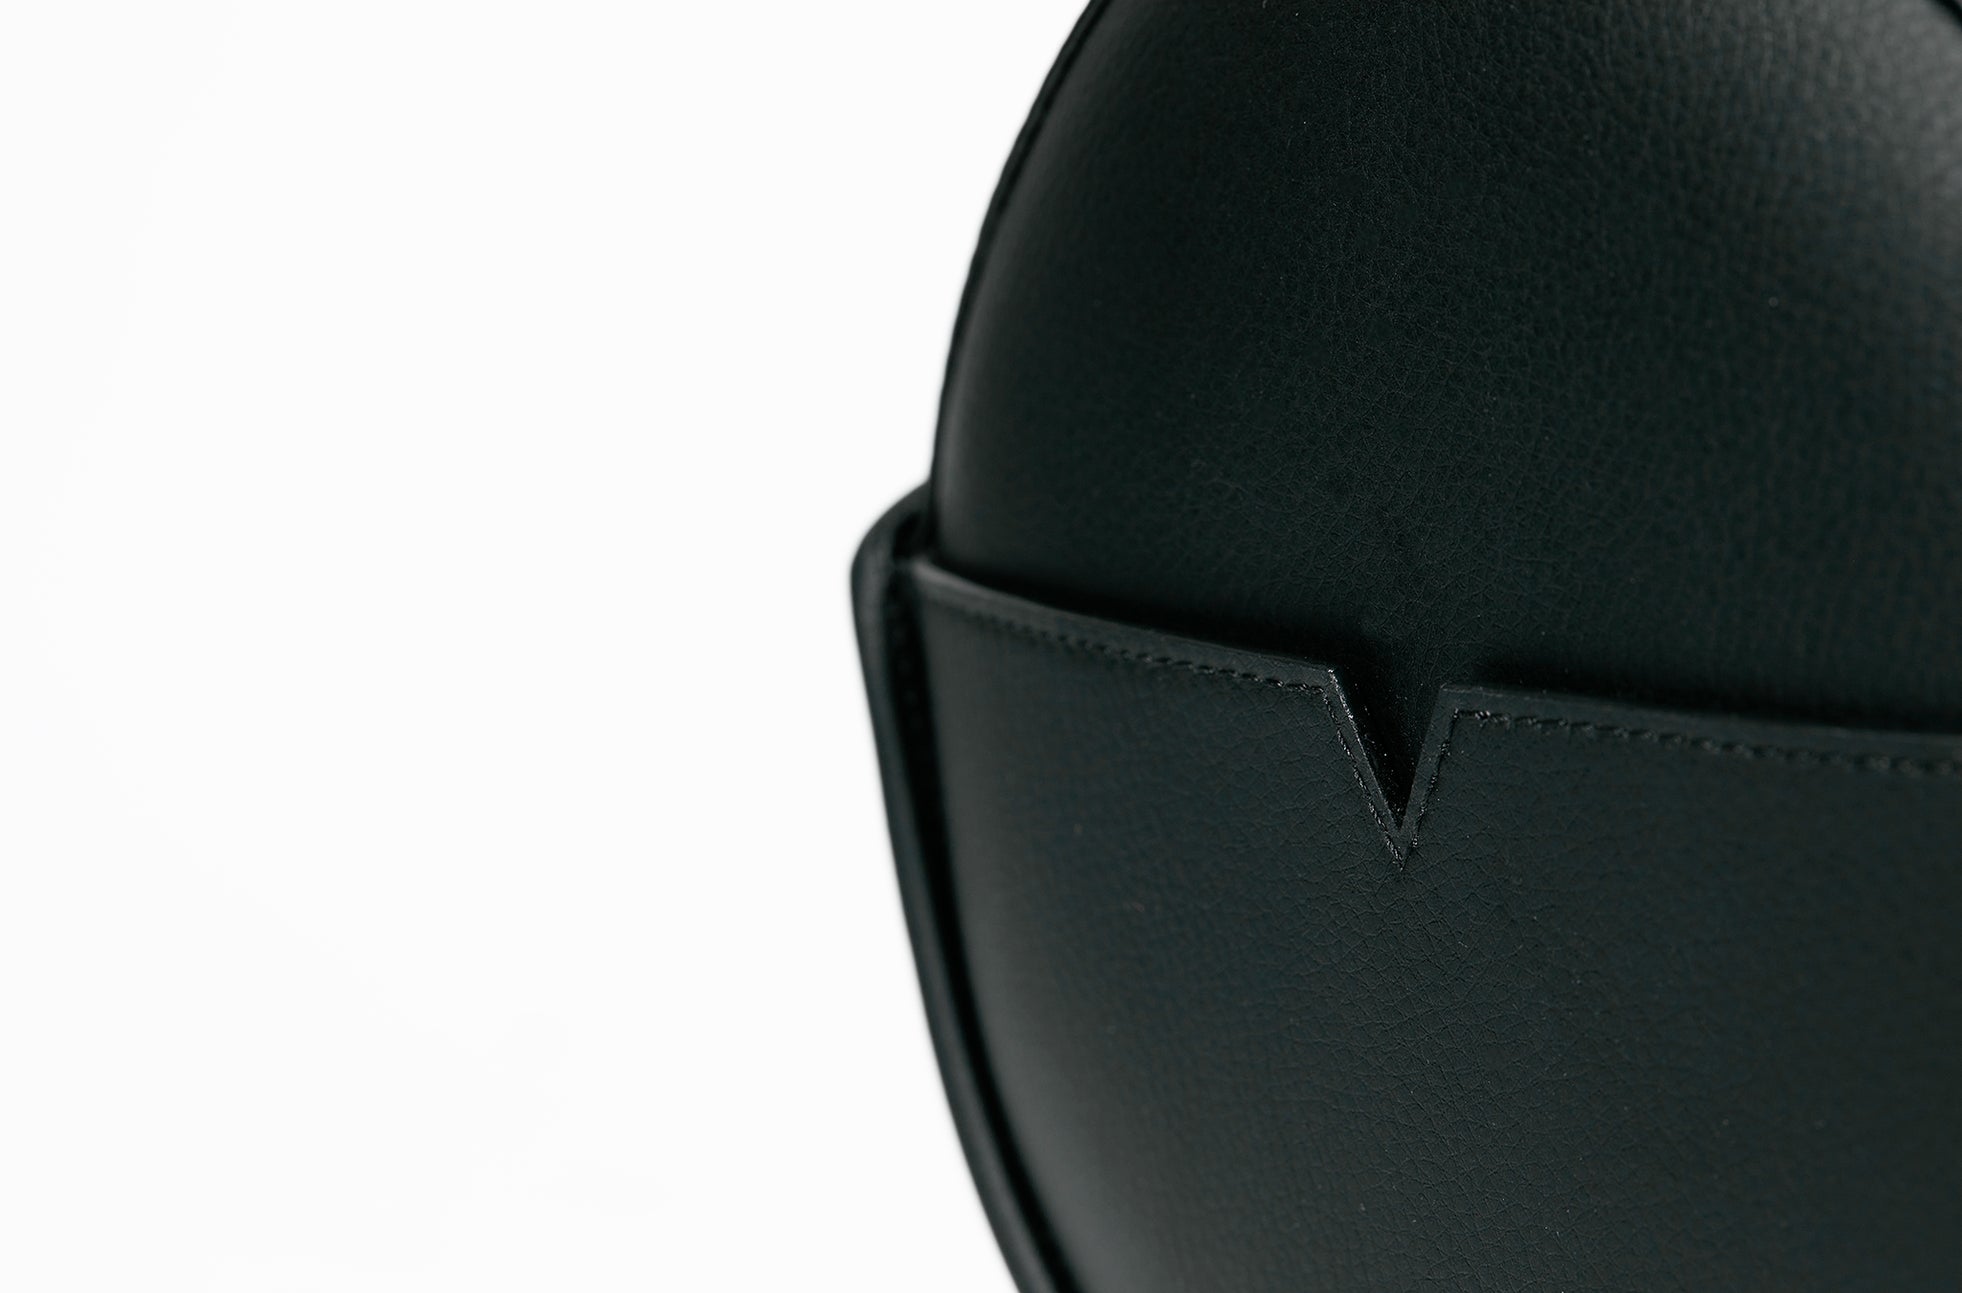 The Circle Crossbody in Banbū Leather in Black image 8